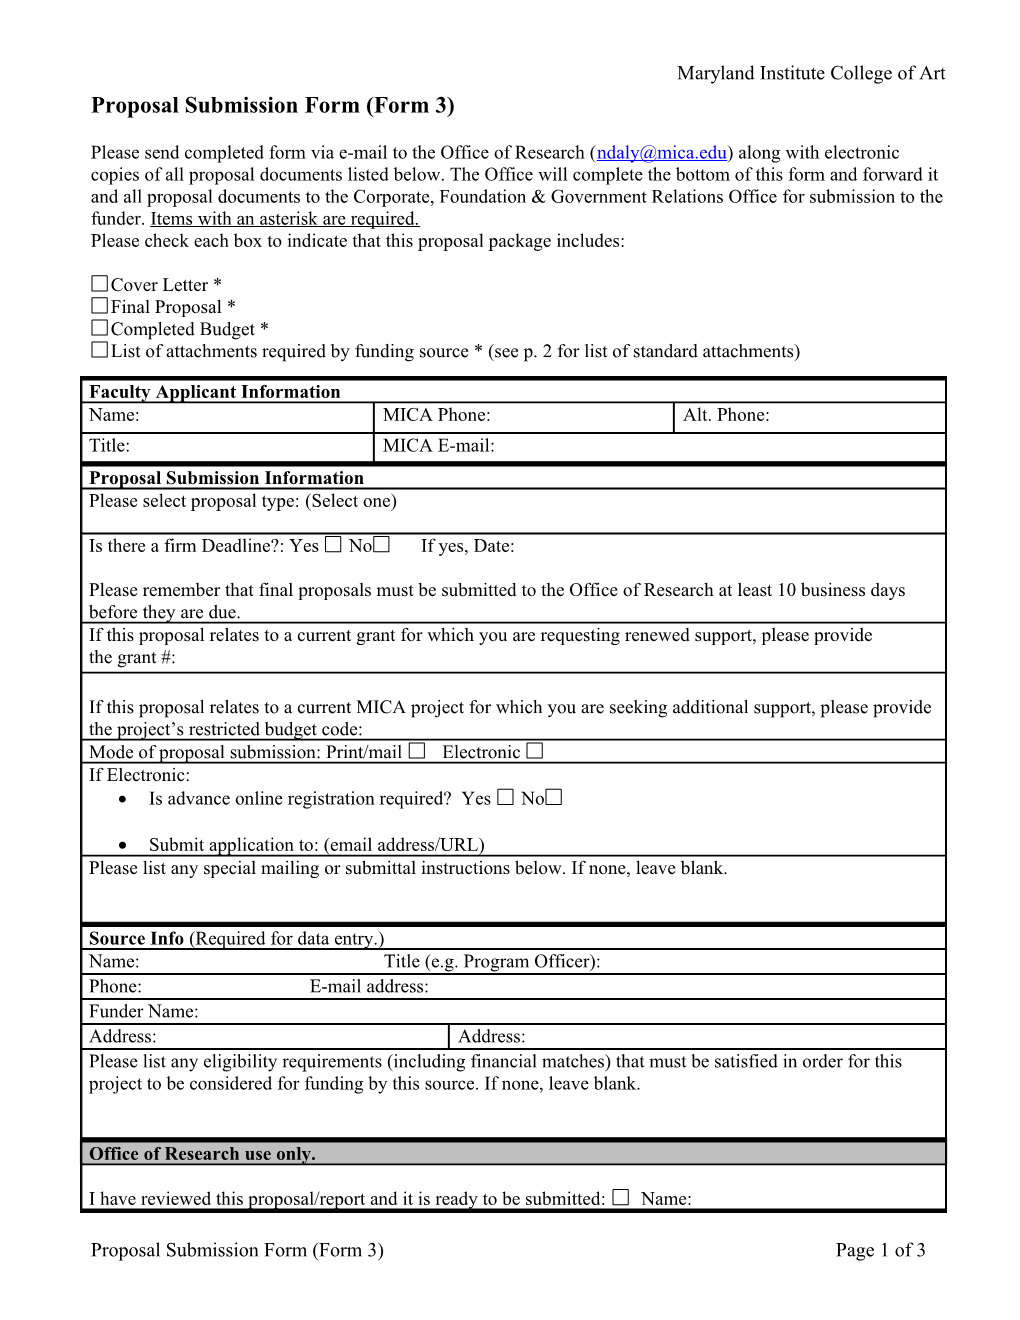 Proposal/Report Submission Form s1